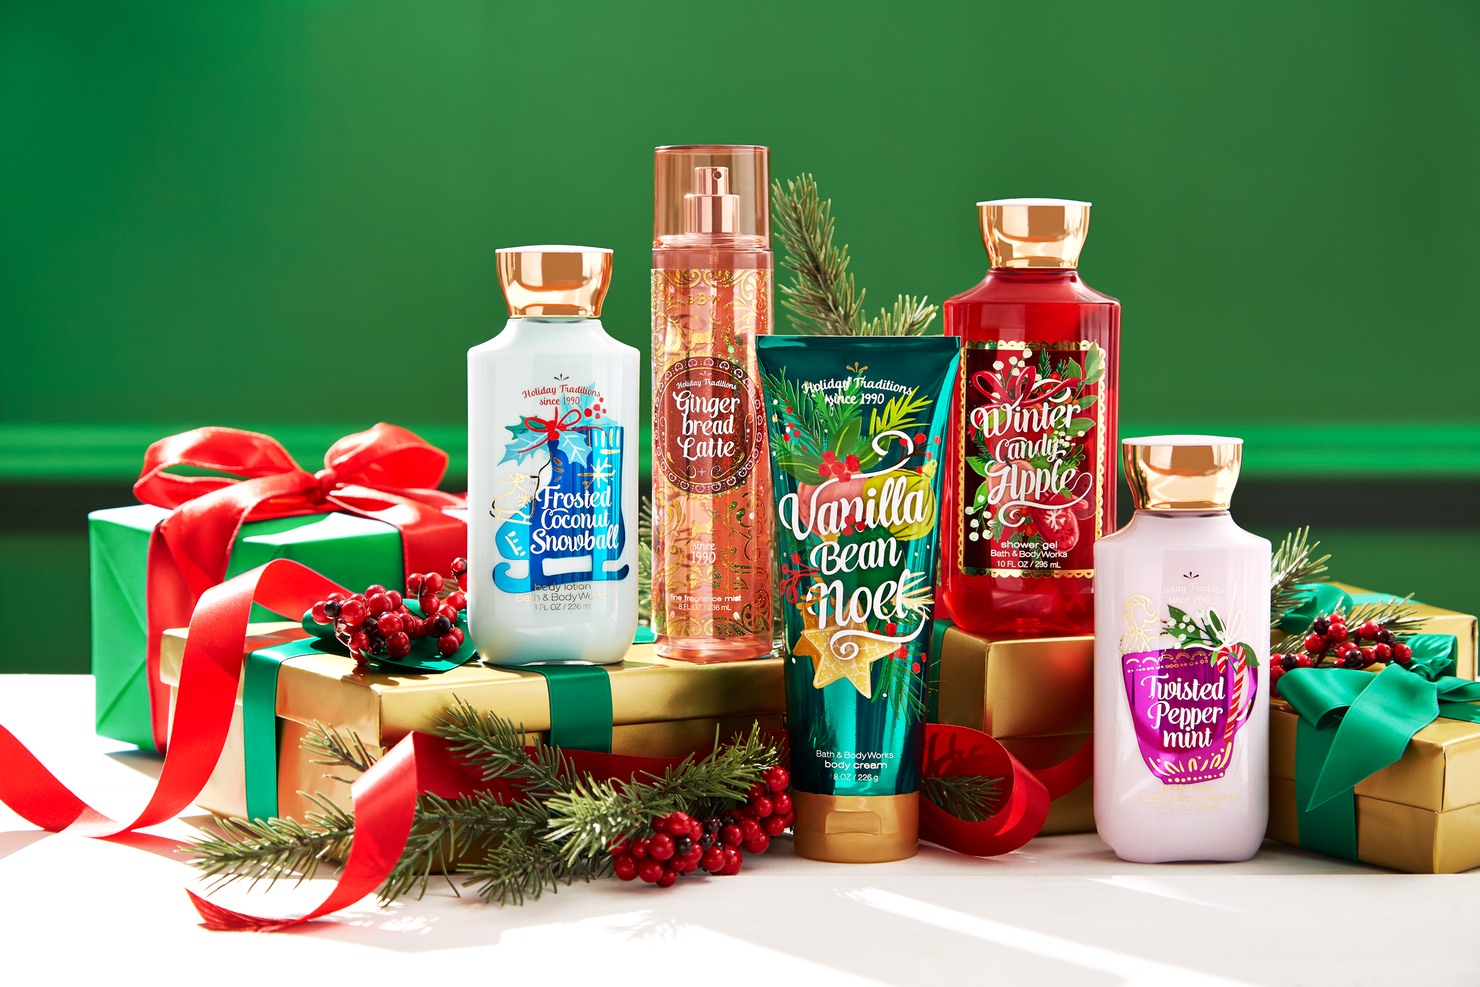 When is Bath & Body Works' holiday collection coming out? Here's what